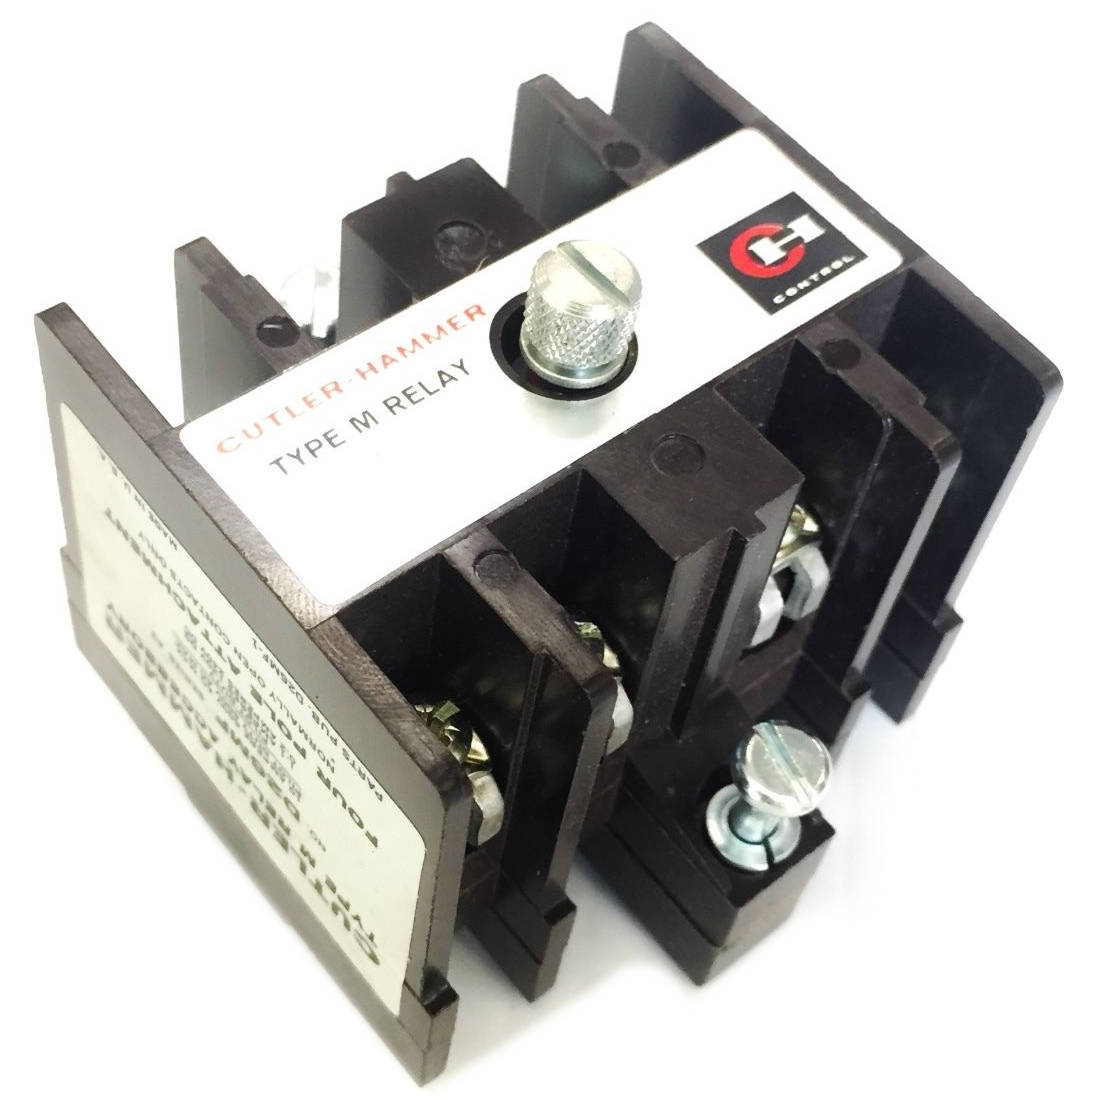 Cutler-Hammer D26 Front Deck For Use With D26 Series Relays 4-Pole 